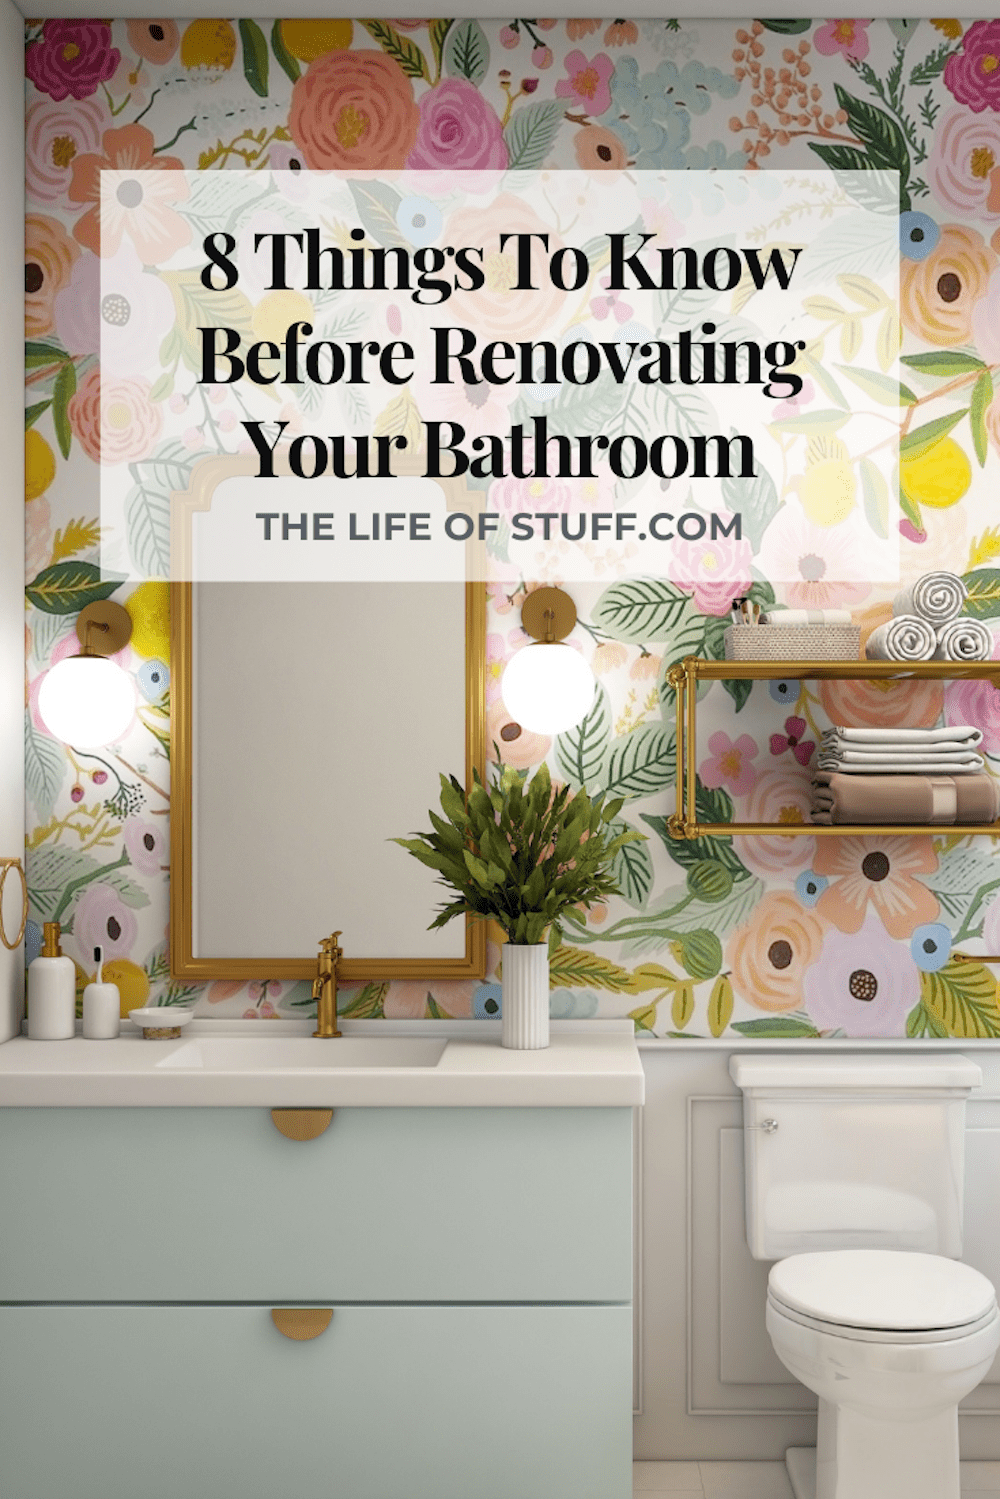 8 Things To Know Before Renovating Your Bathroom - The Life of Stuff